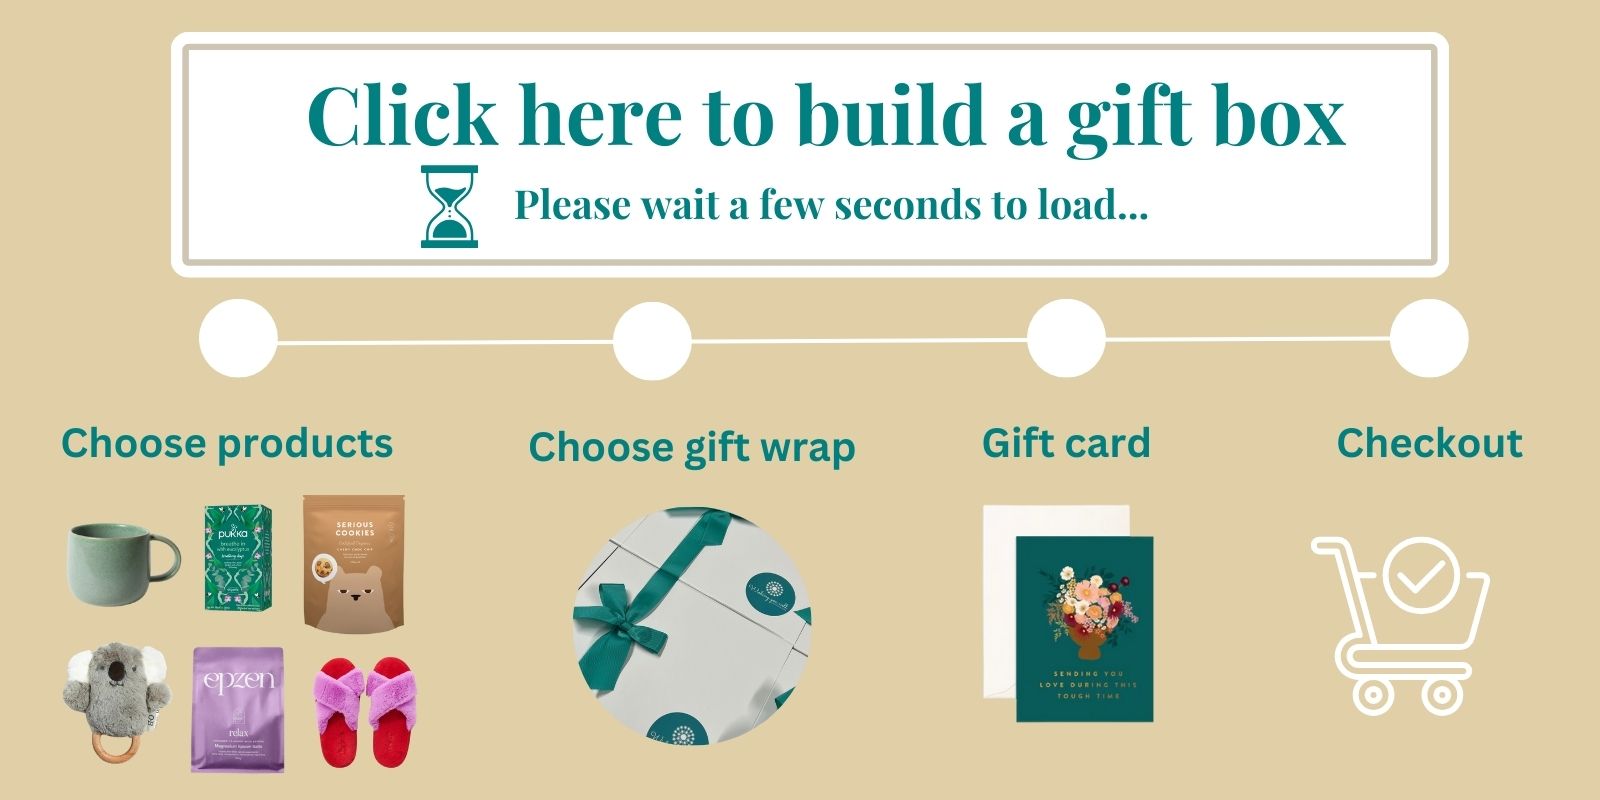 Build Your Own Gift box in just a few clicks!